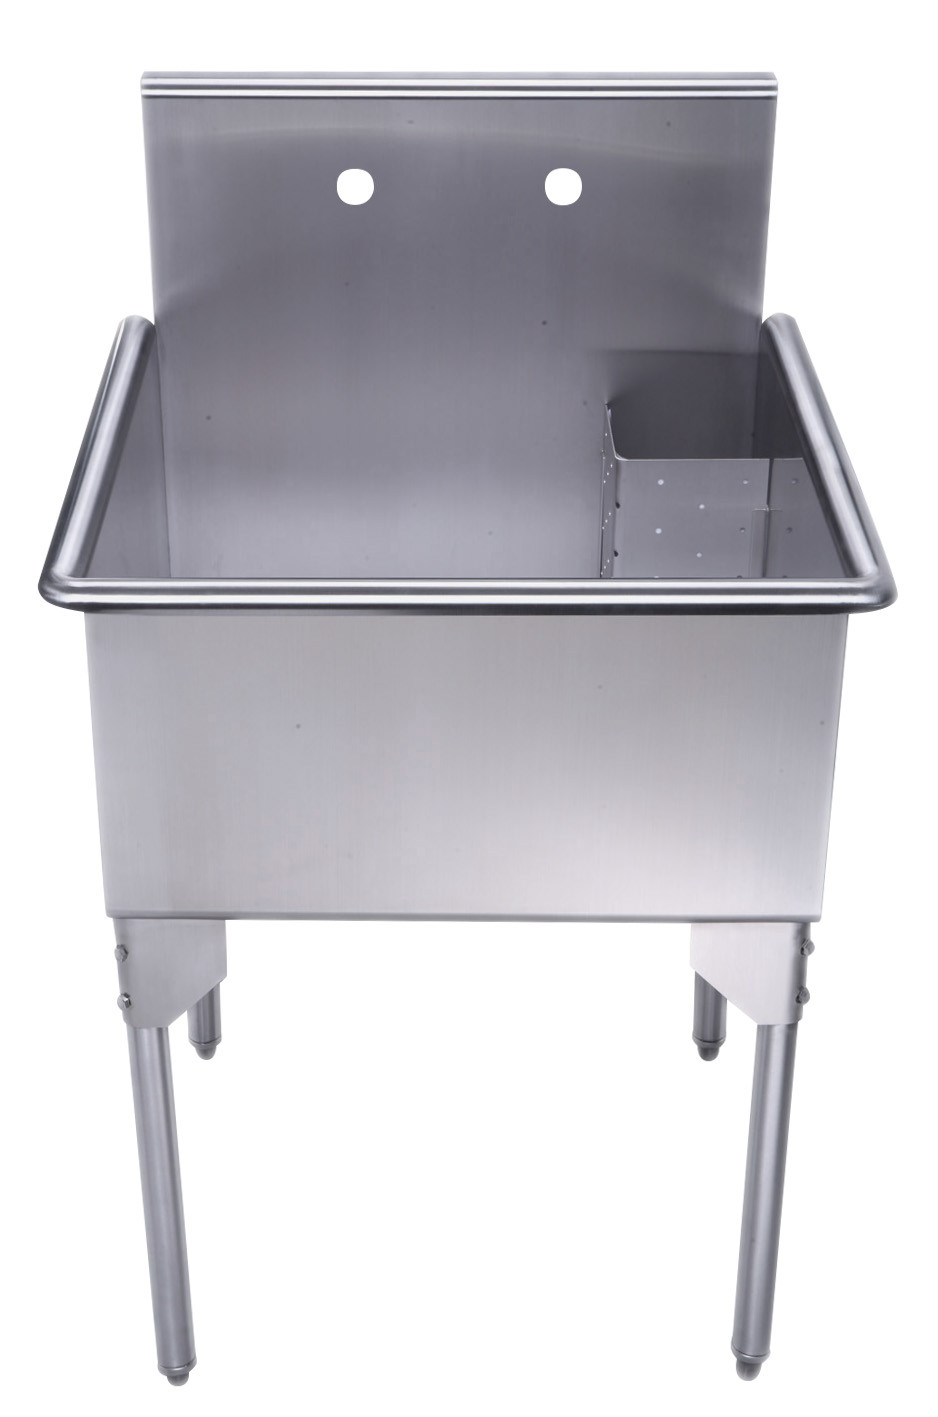 Whitehaus WHLS2424-NP 24" Brushed Stainless Steel Freestanding Utility Sink